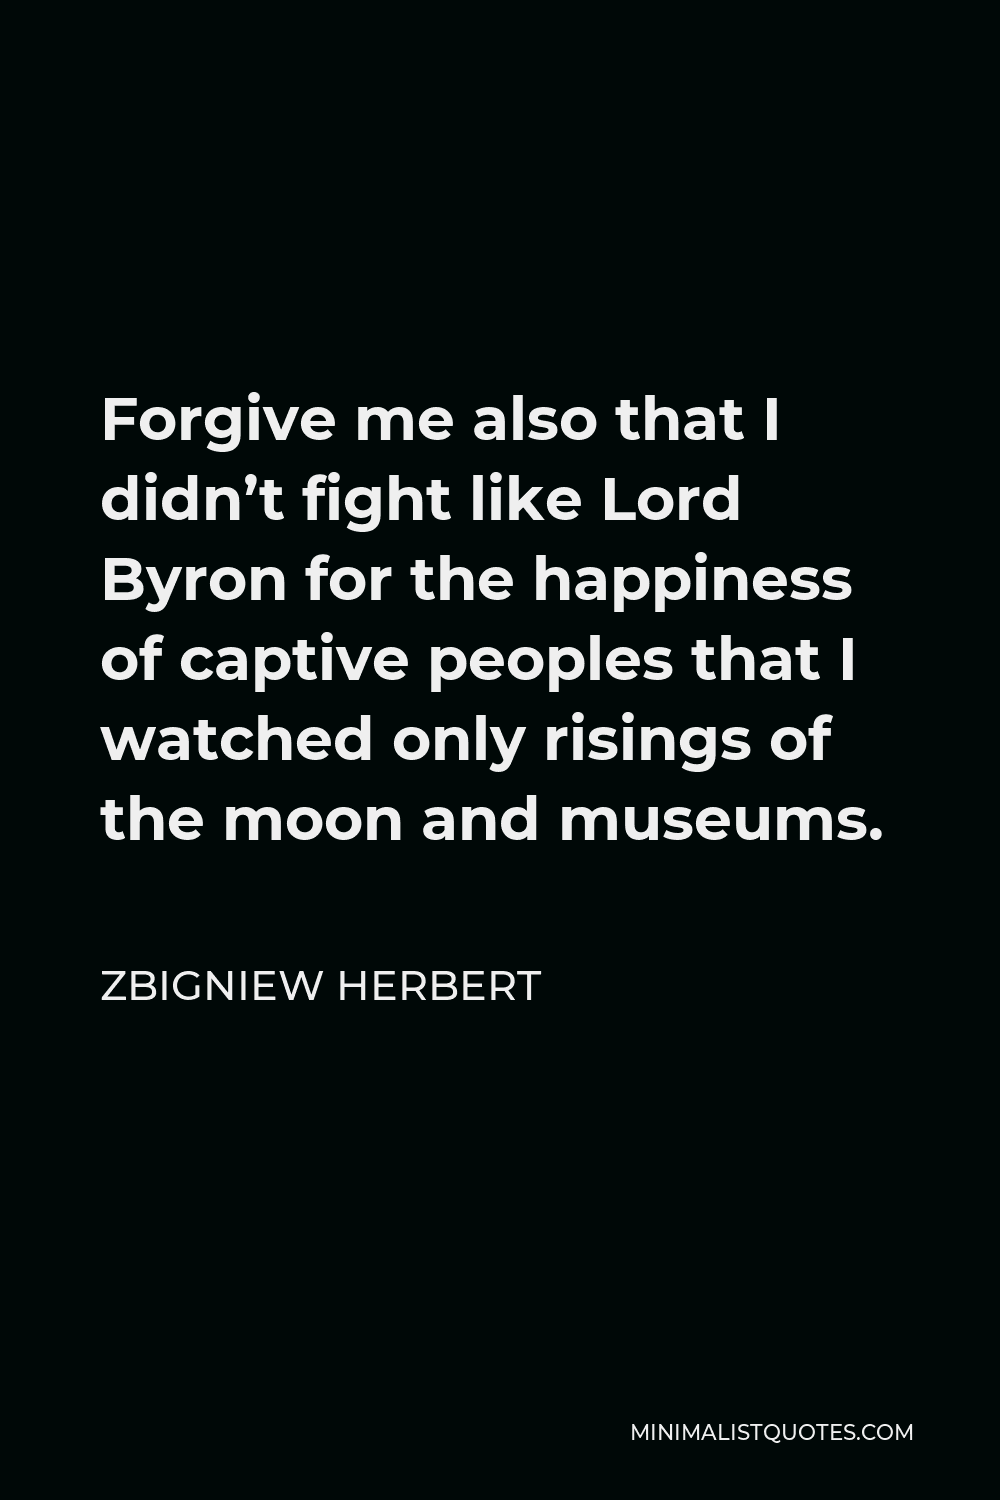 Zbigniew Herbert Quote - Forgive me also that I didn’t fight like Lord Byron for the happiness of captive peoples that I watched only risings of the moon and museums.